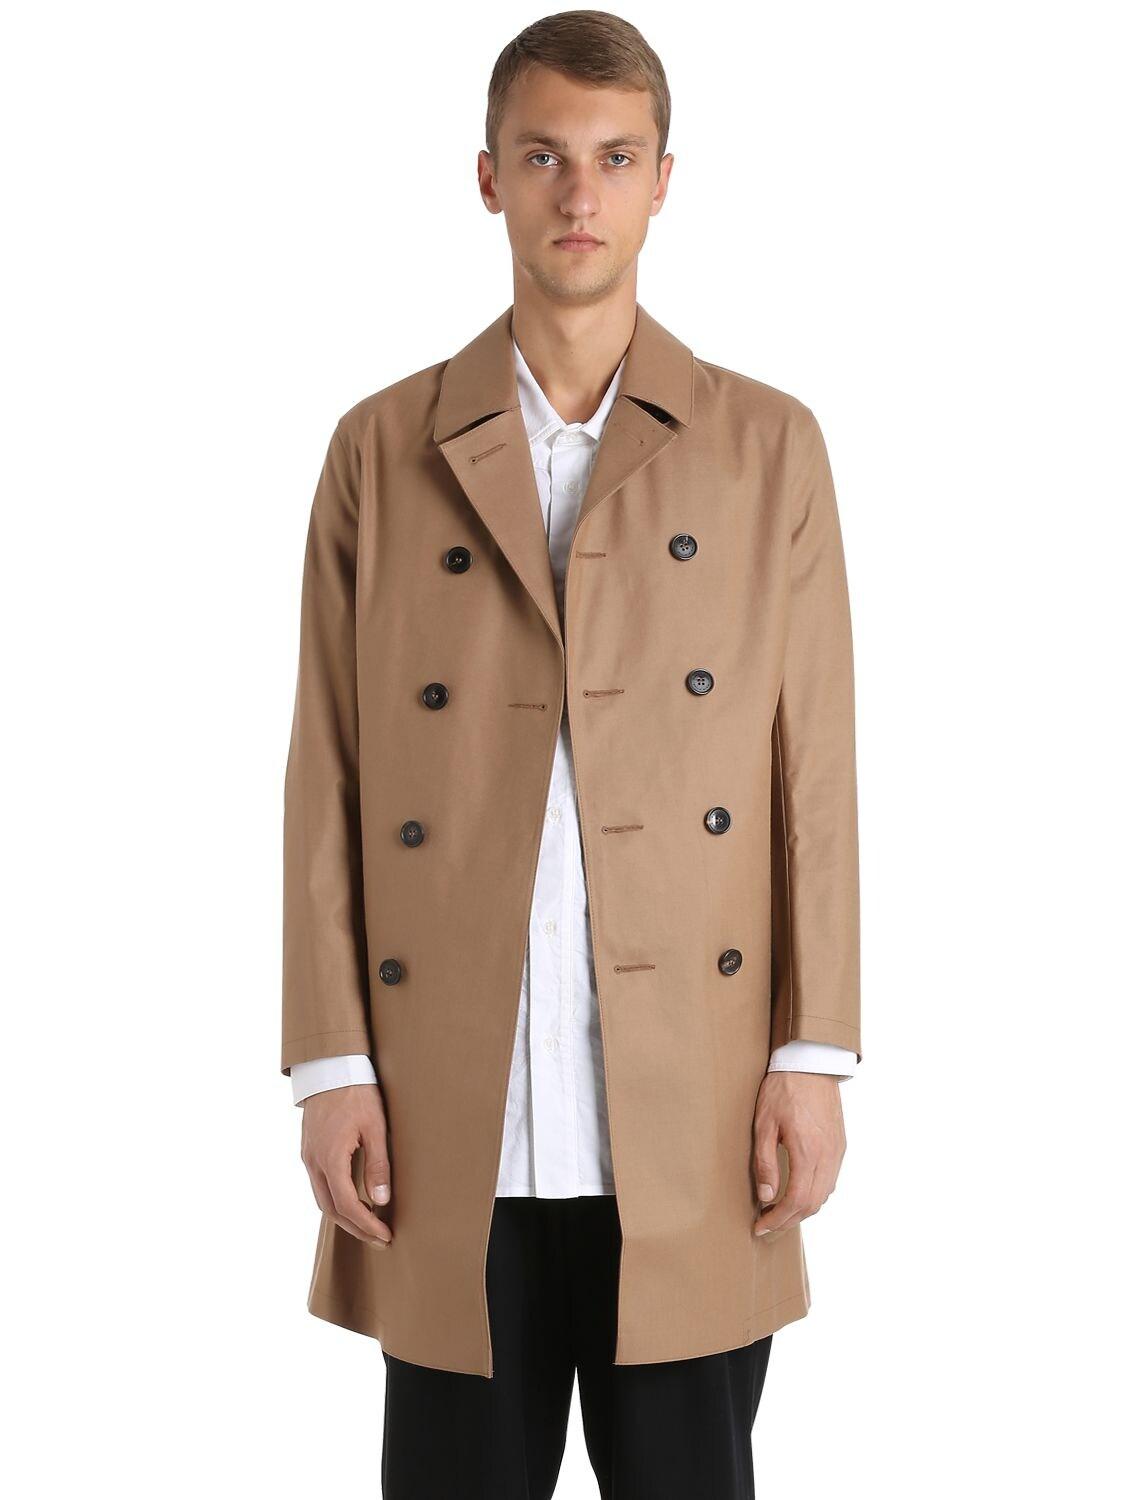 Mackintosh Rubberized Wool Coat in Beige (Natural) for Men - Save 30% ...